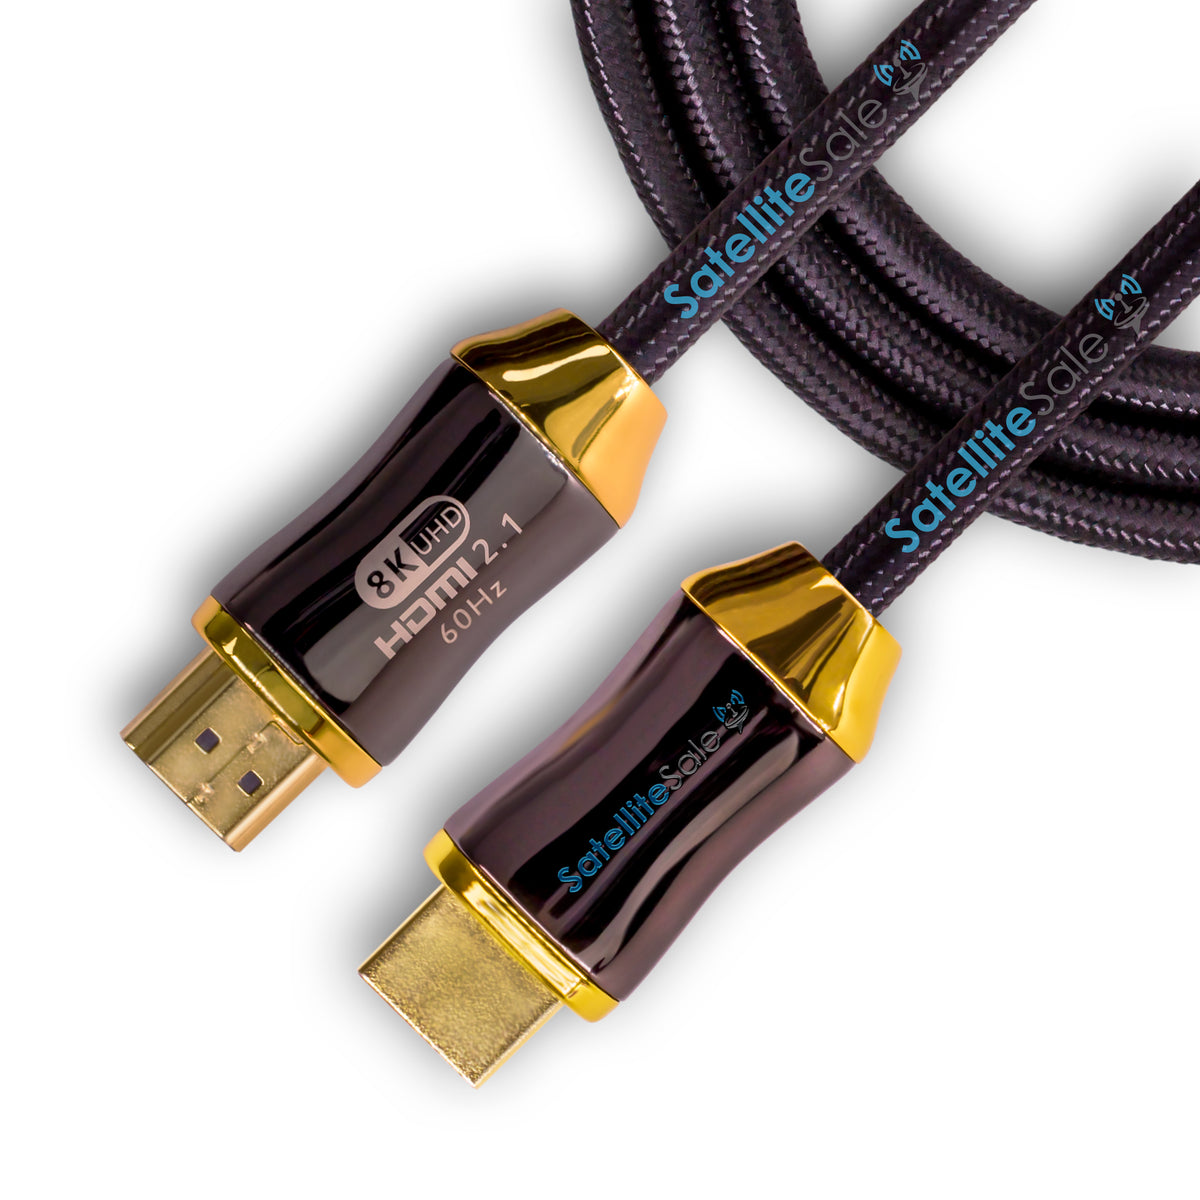 Electronic Master 6 ft. High Speed HDMI to Mini HDMI Cable